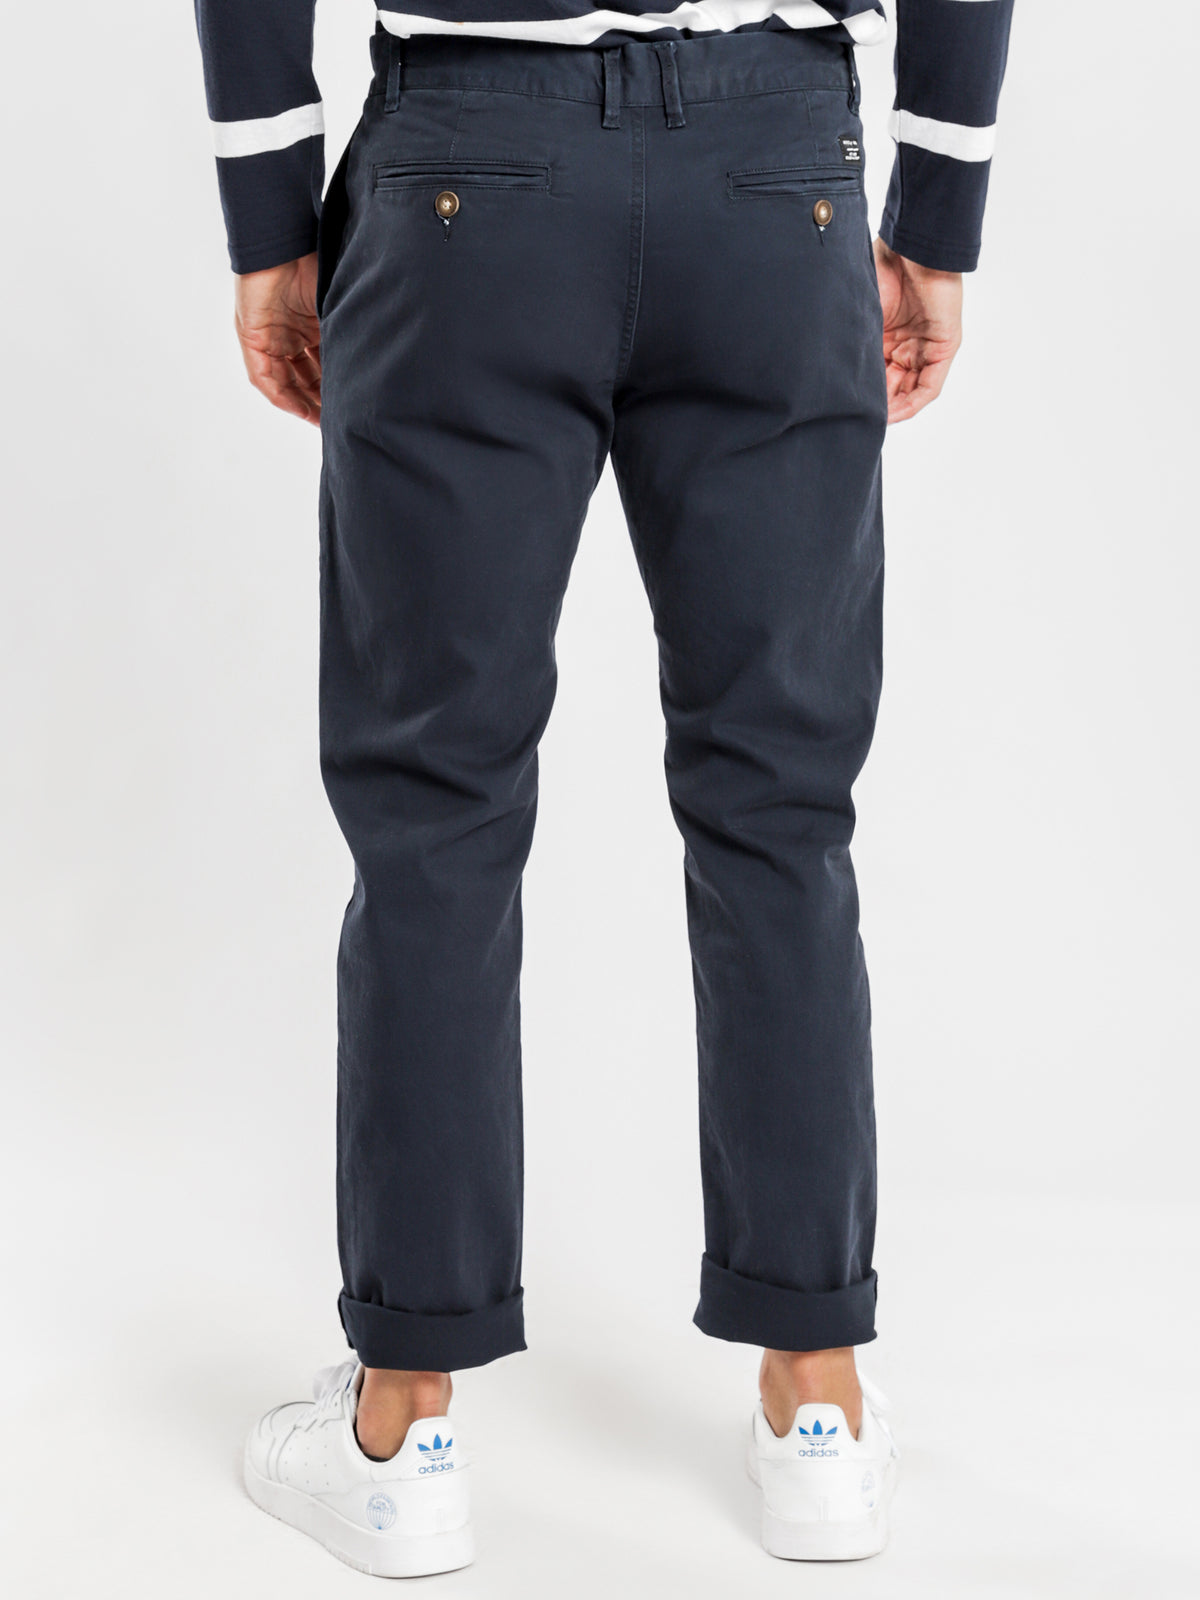 Hunter Chino Pant in Navy Blue